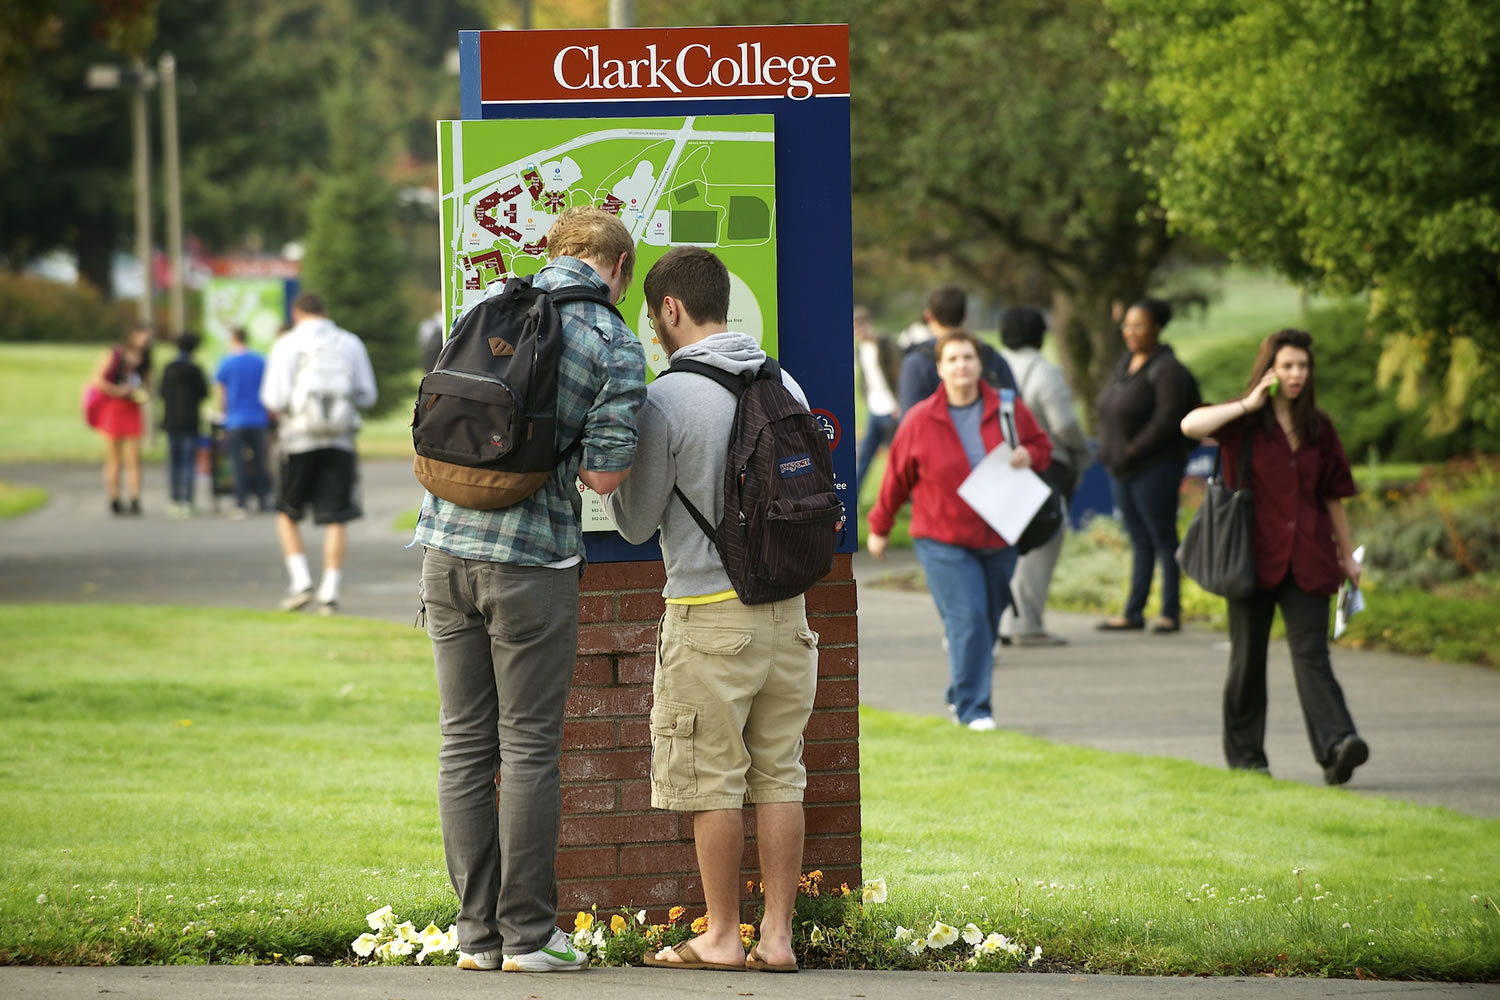 Brody Vogue, left, and Sam Farra, both of Vancouver, look over a campus map on their way to journalism class on the first day of classes at Clark College in September 2012.